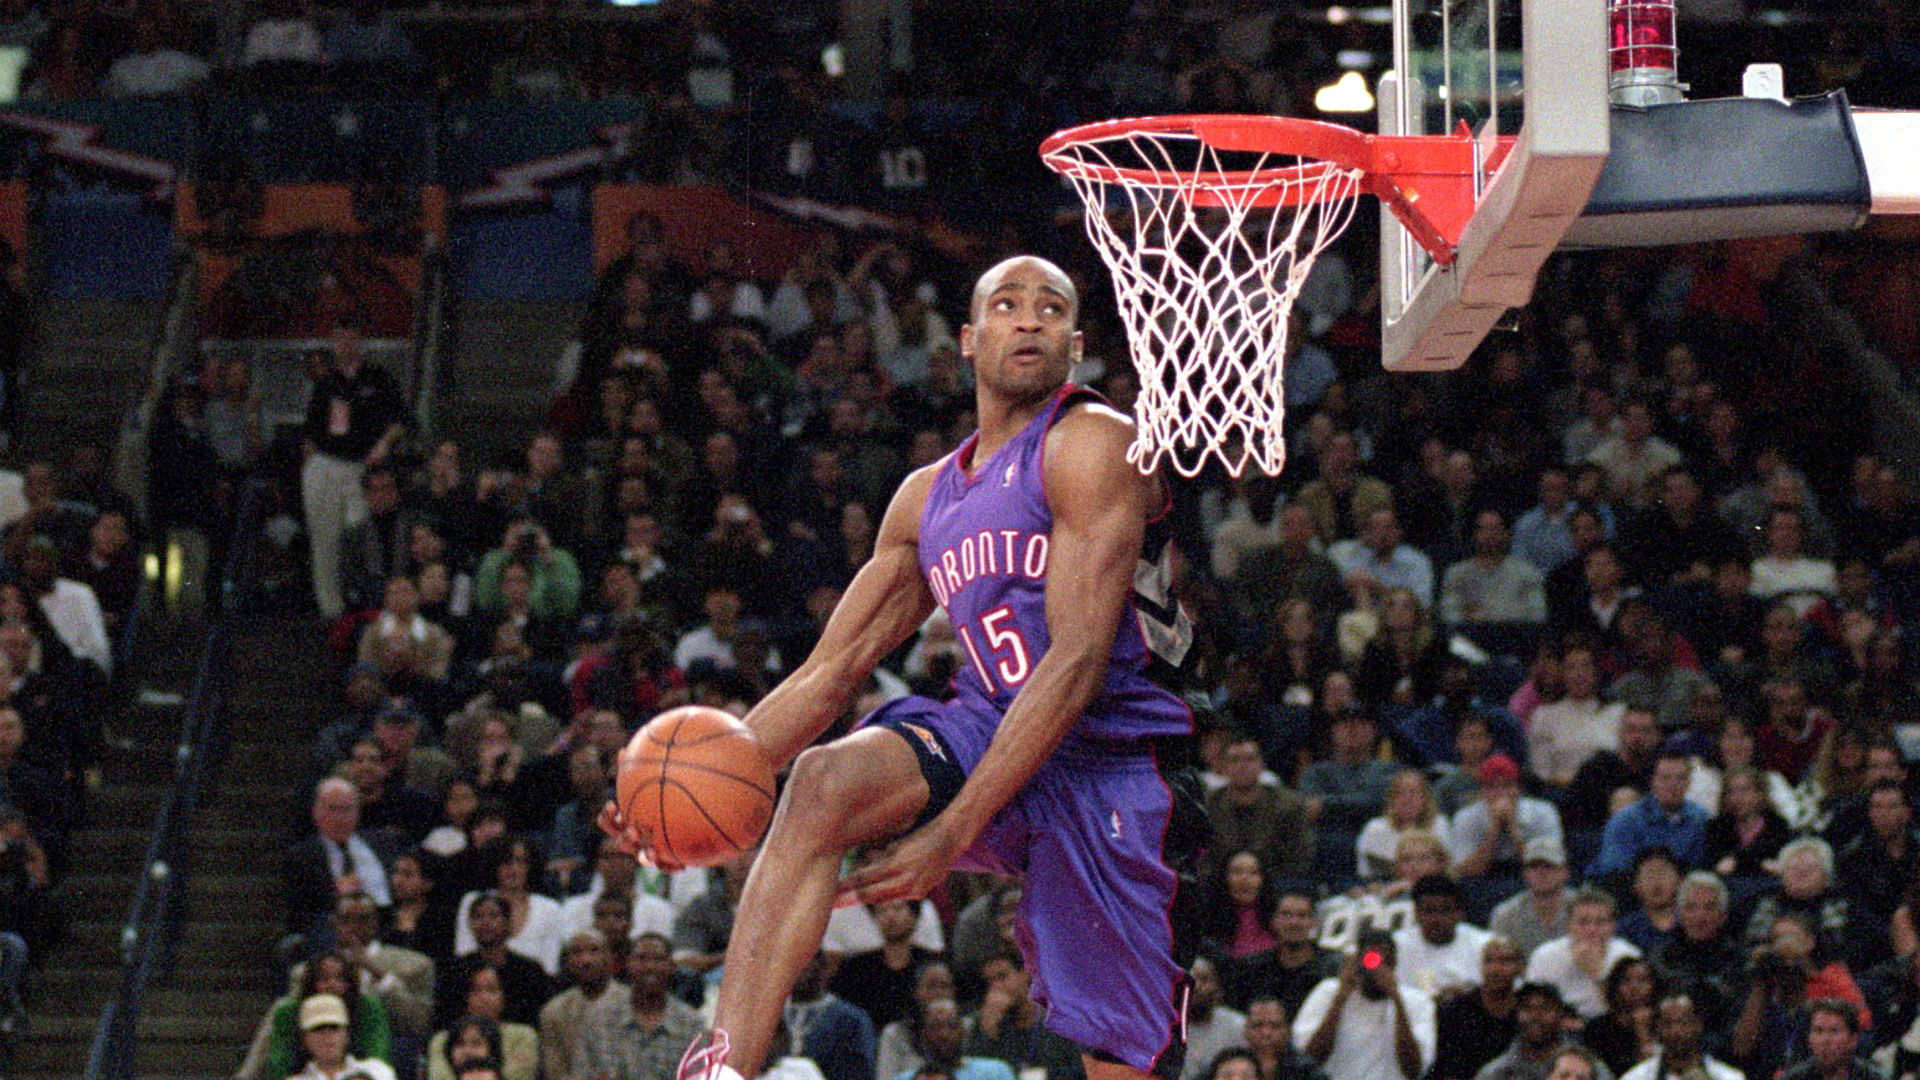 1920x1080 ... Vince Carter Classics Pictures | Getty Images ...